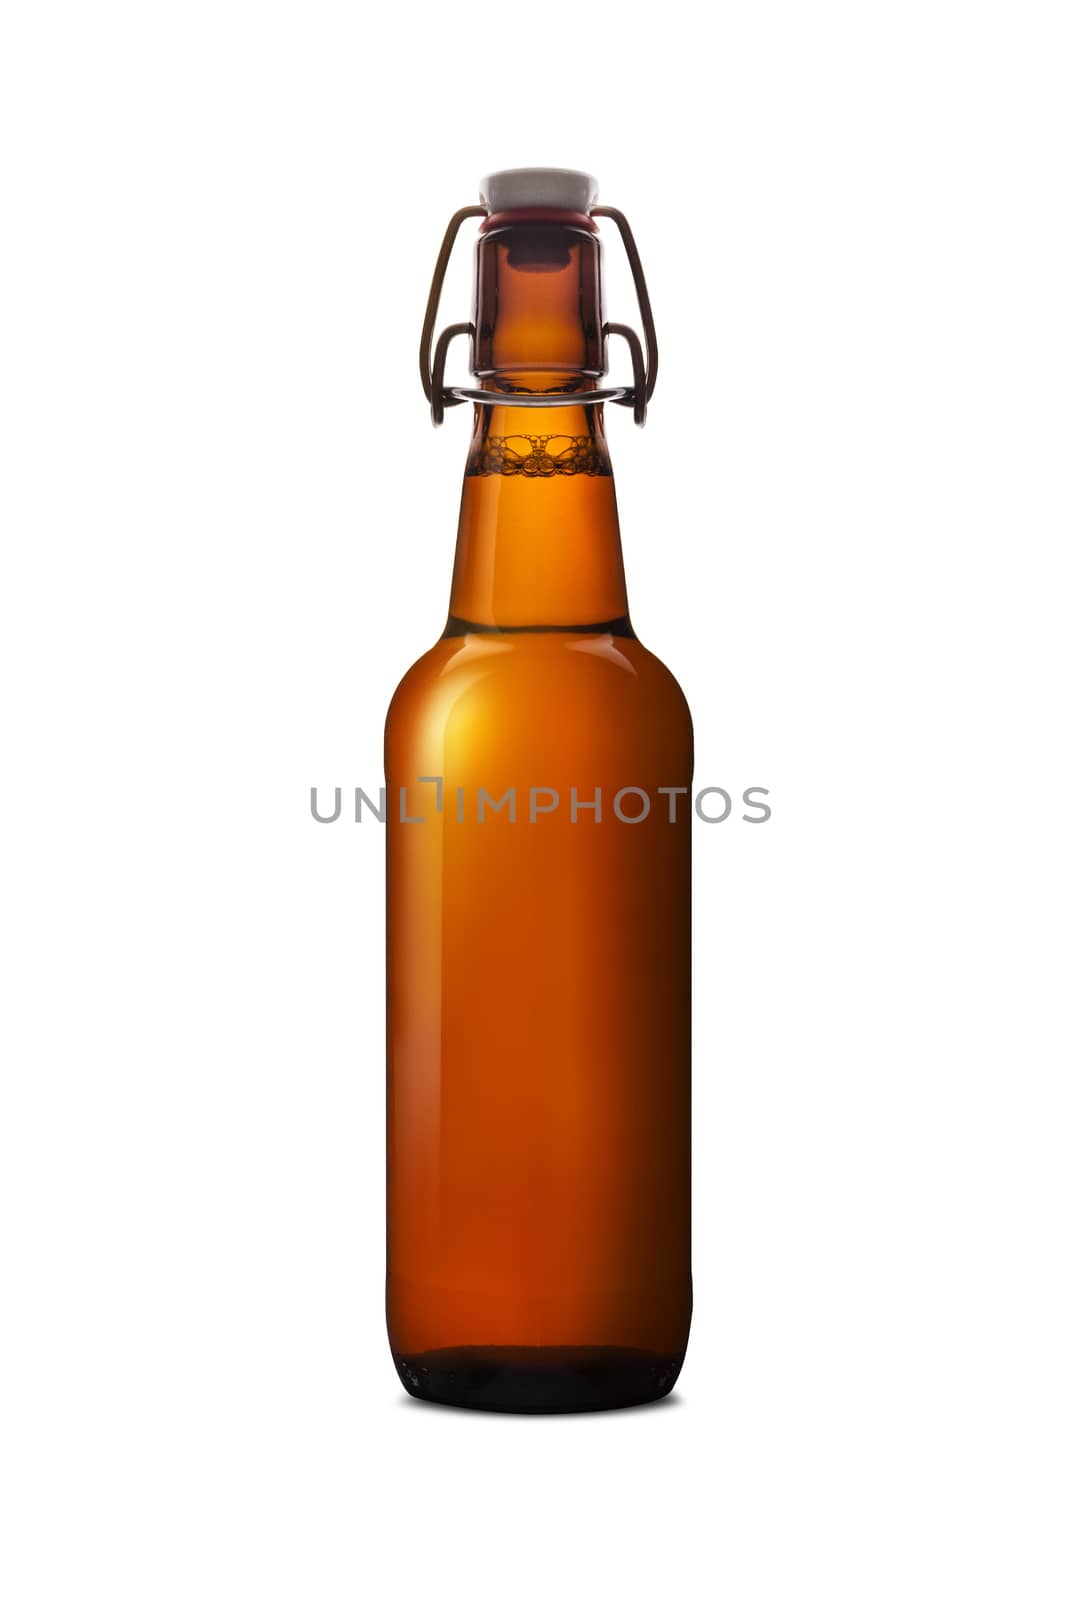 Old brown bottle filled with of beer isolated on white background